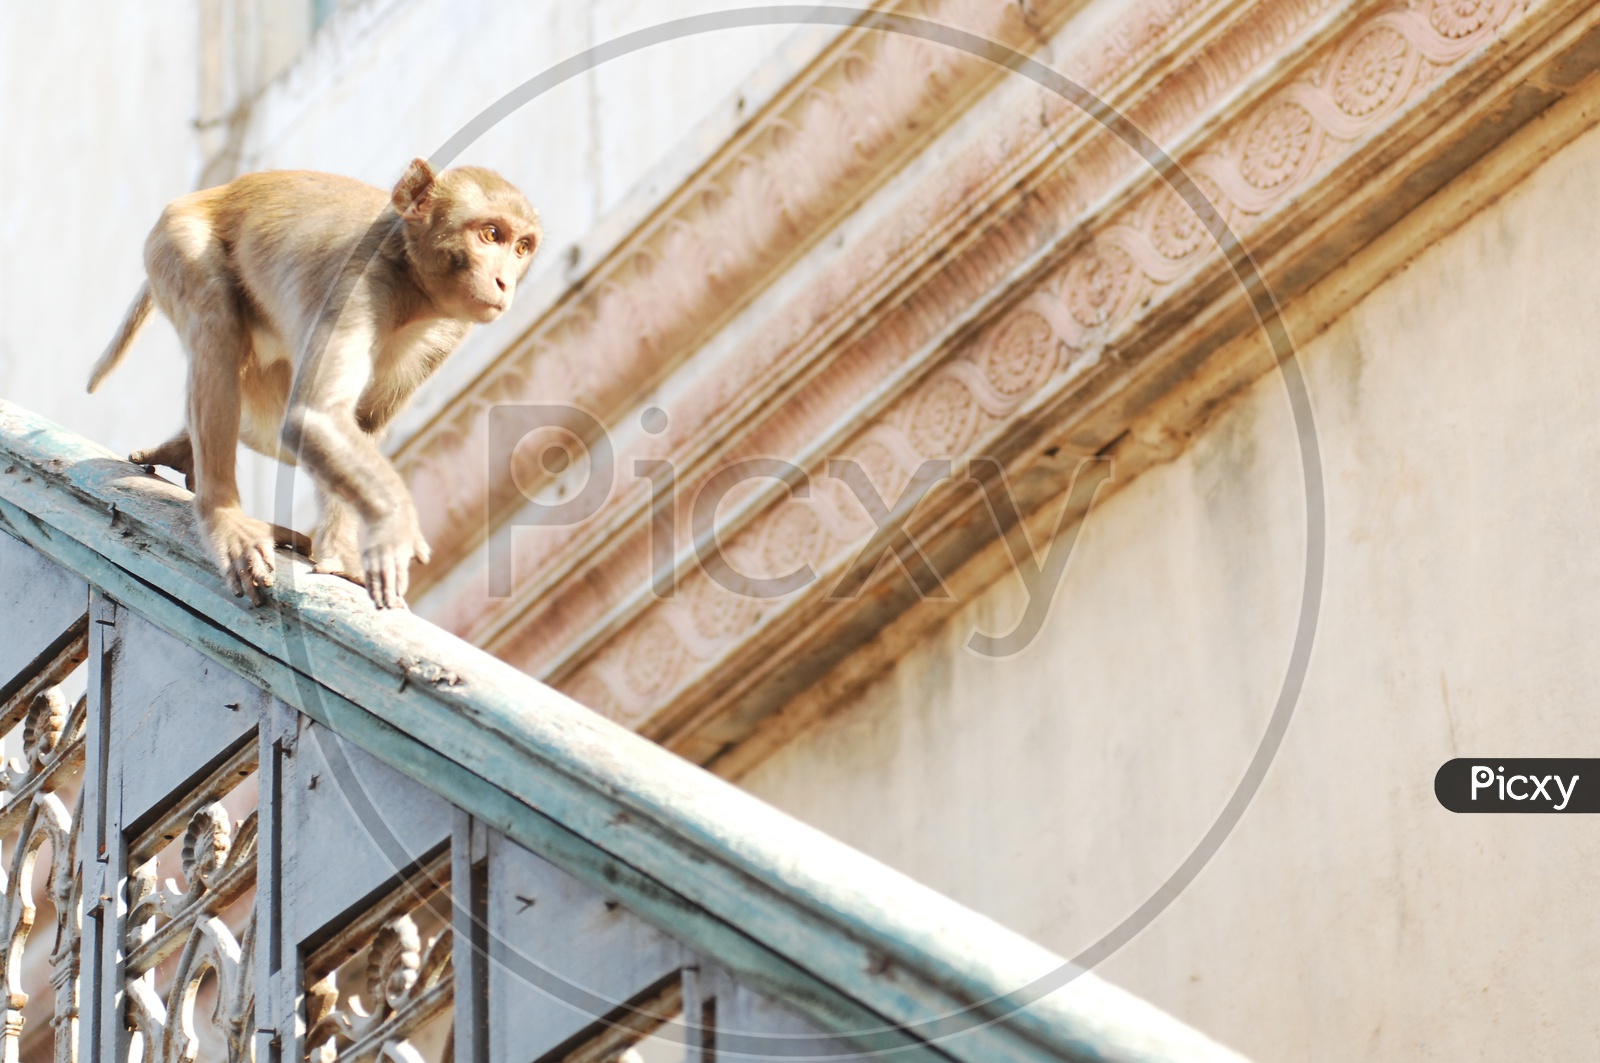 An Young Macaque Or Monkey Running On a Wall